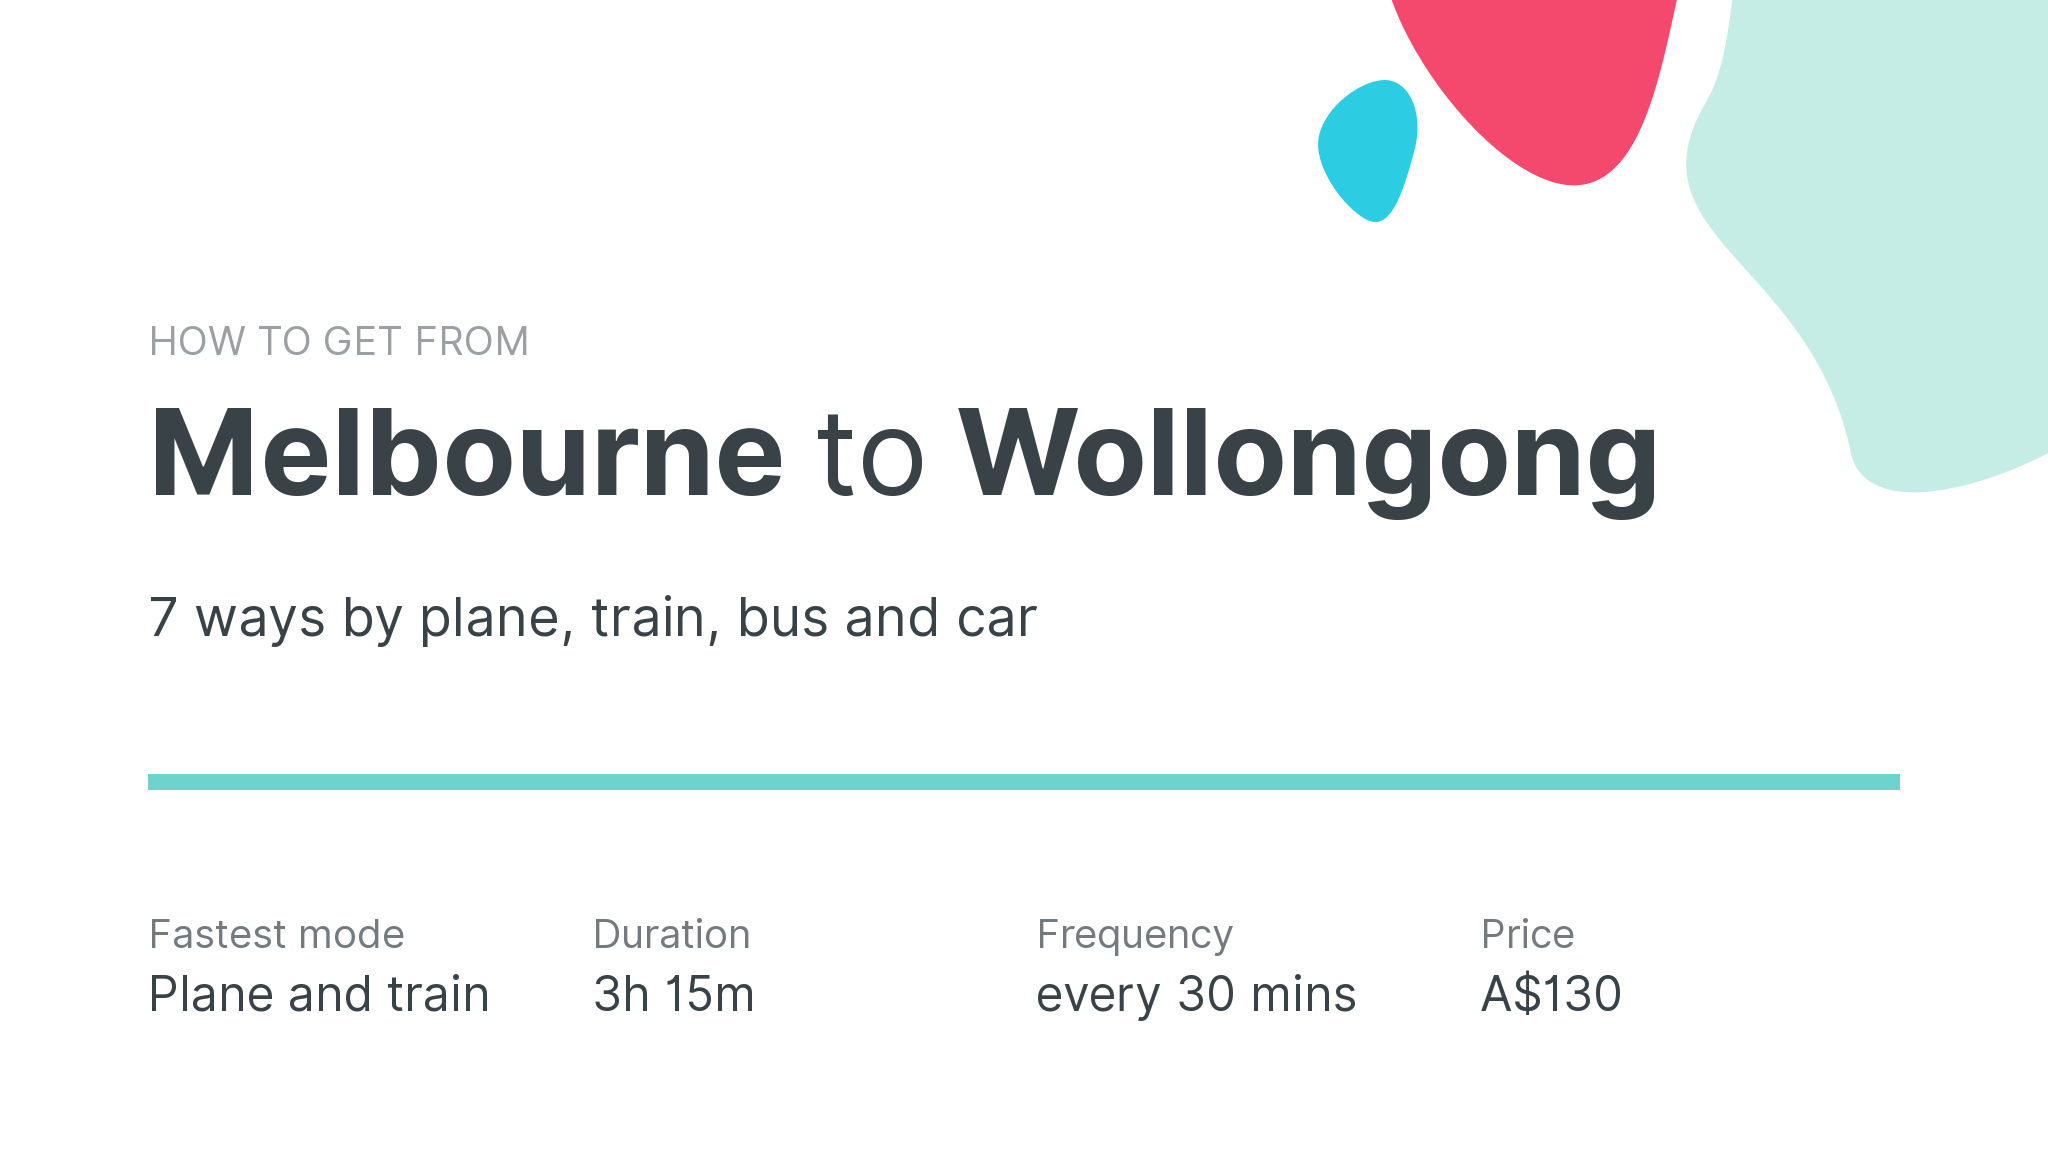 How do I get from Melbourne to Wollongong